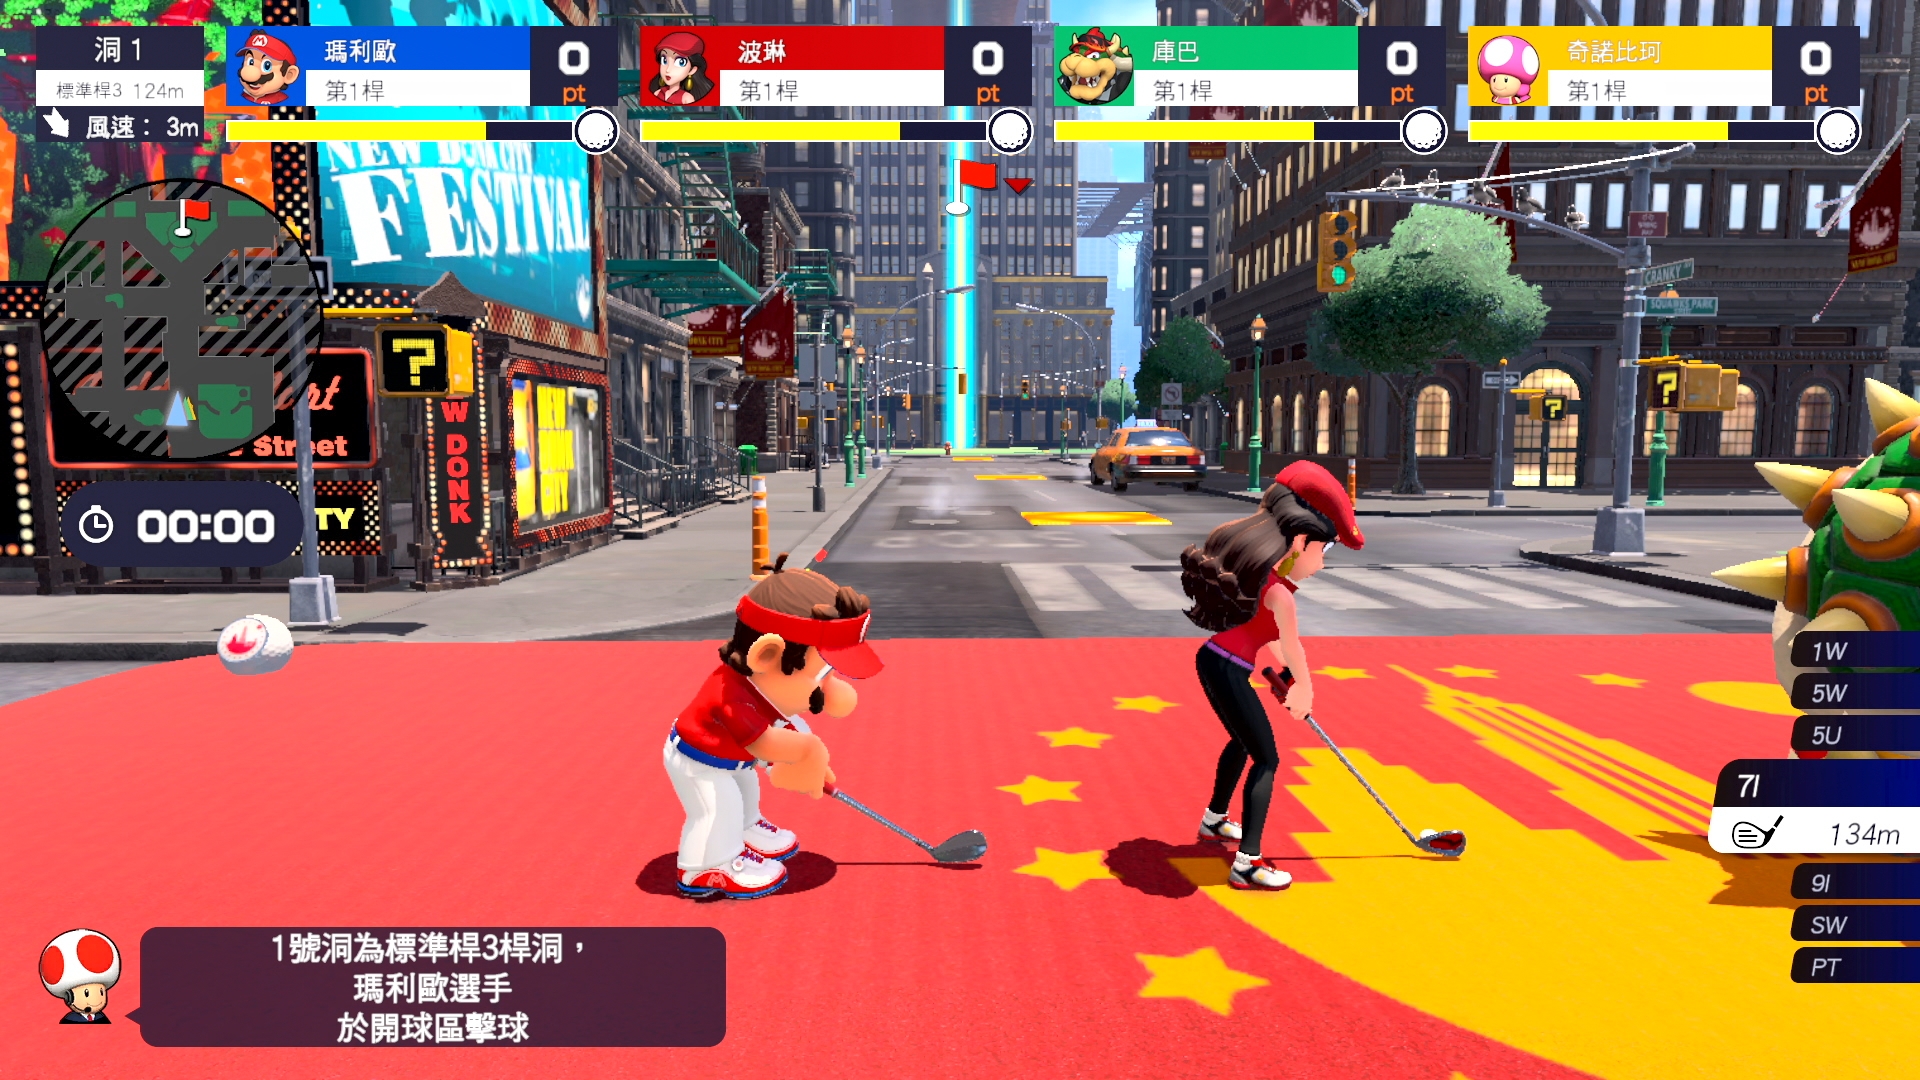  Mario Golf: Super Rush Free Update 2.0.0 New Mode, New Role, New Map